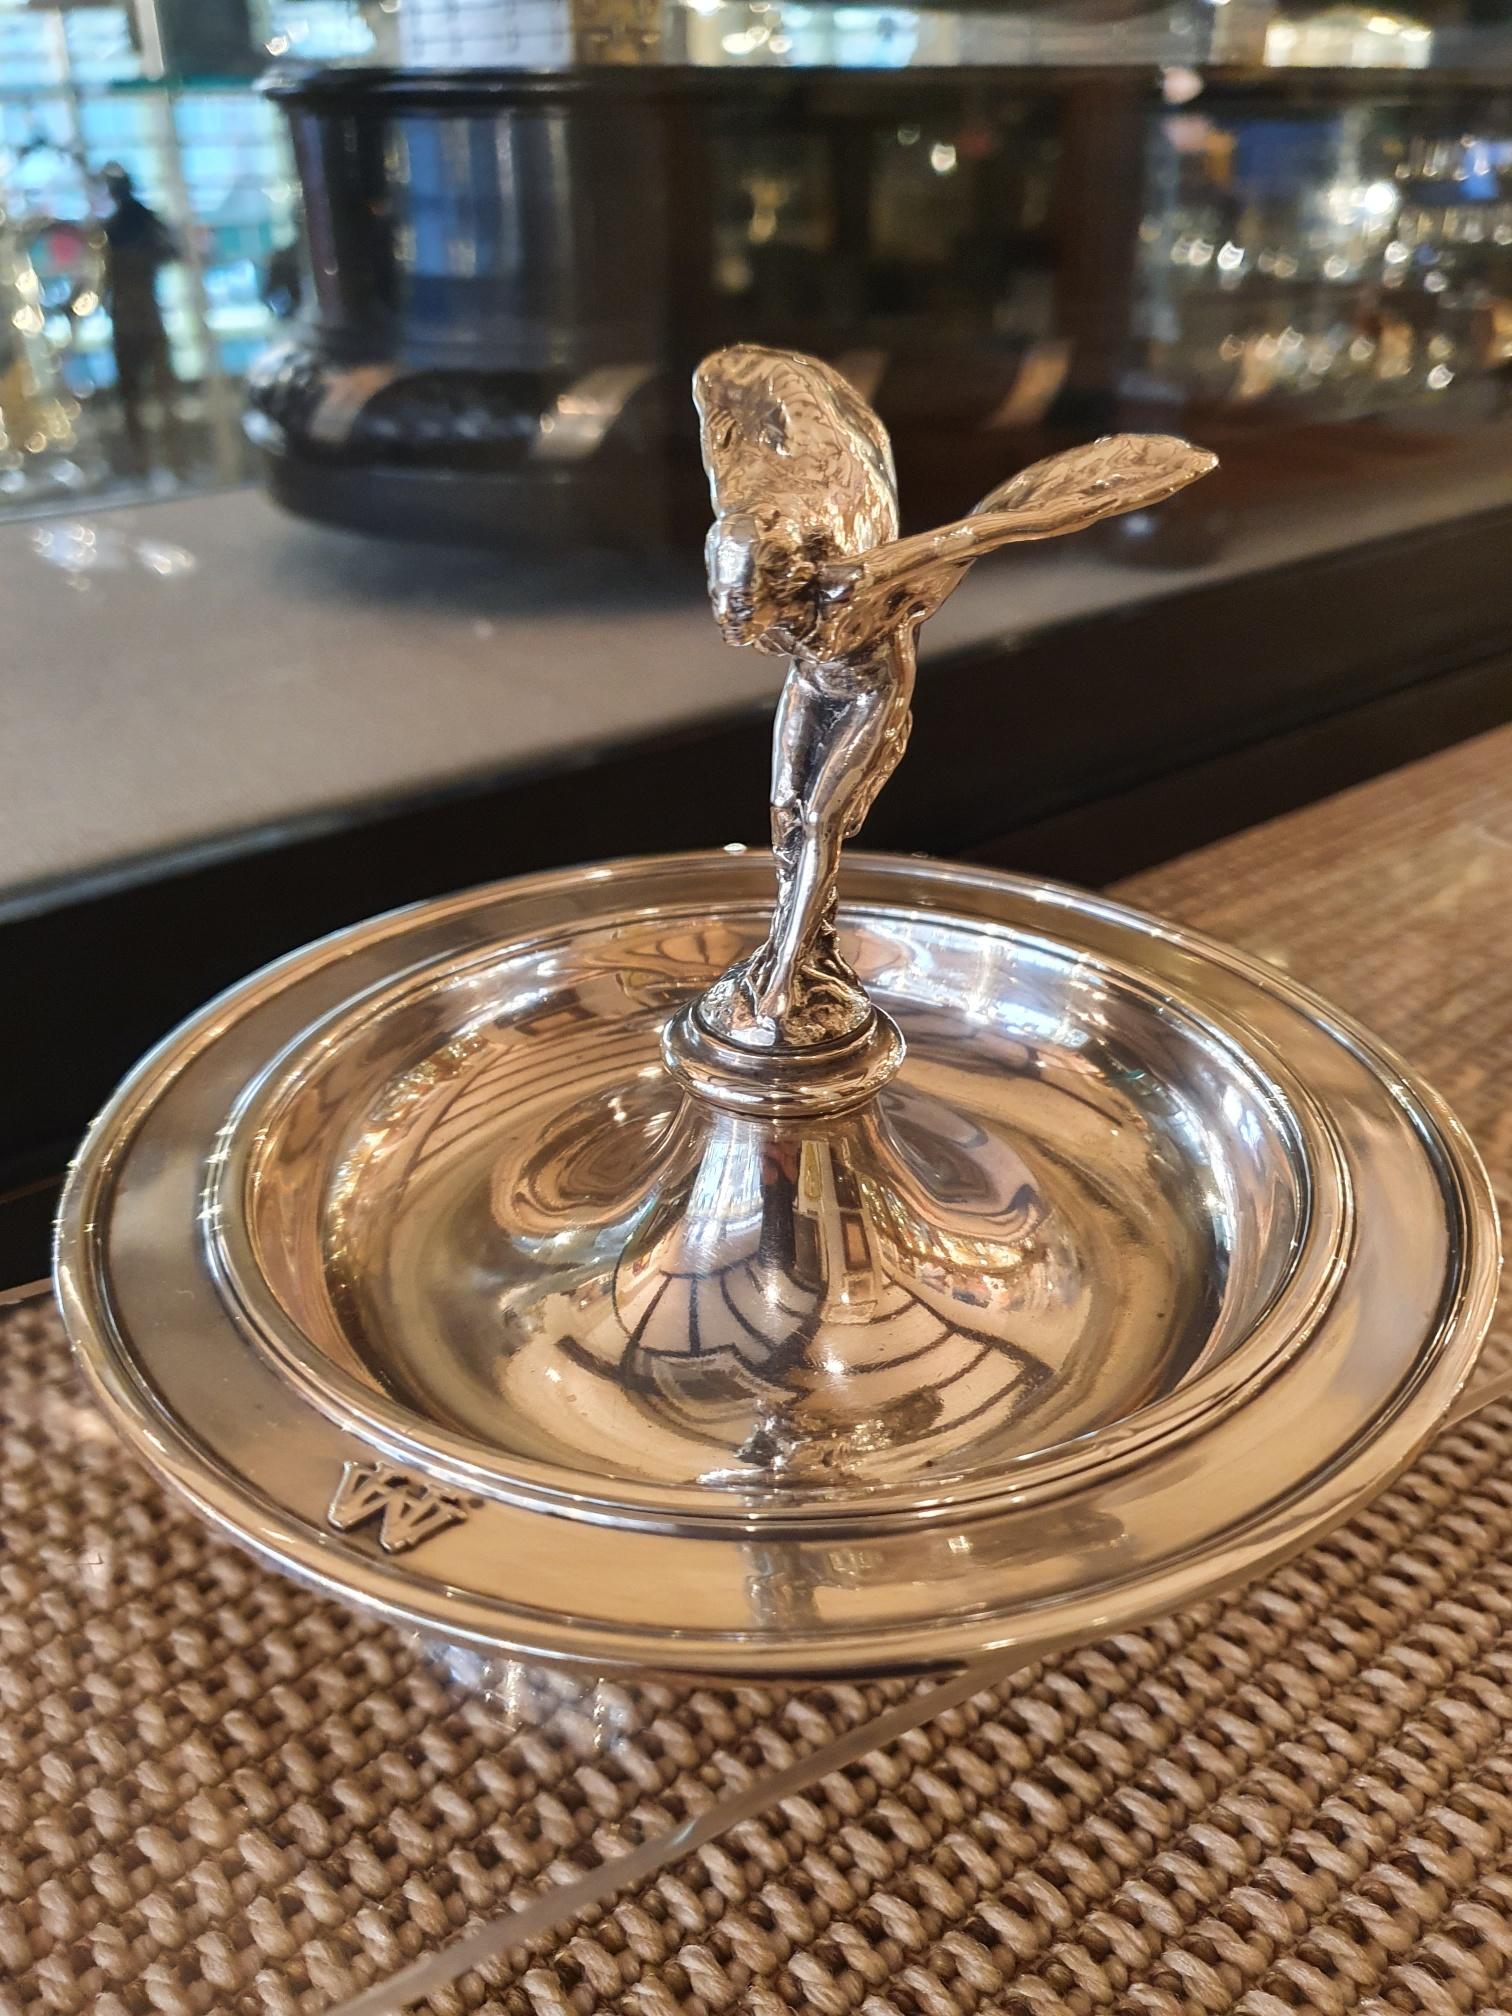 The Spirit of Ecstasy mascot has adorned Rolls-Royce automobiles for over 90 years and is one of the world’s most readily identified images. In 1926, the Directors of Rolls-Royce Motors decided to commission a gift, to be produced in a small